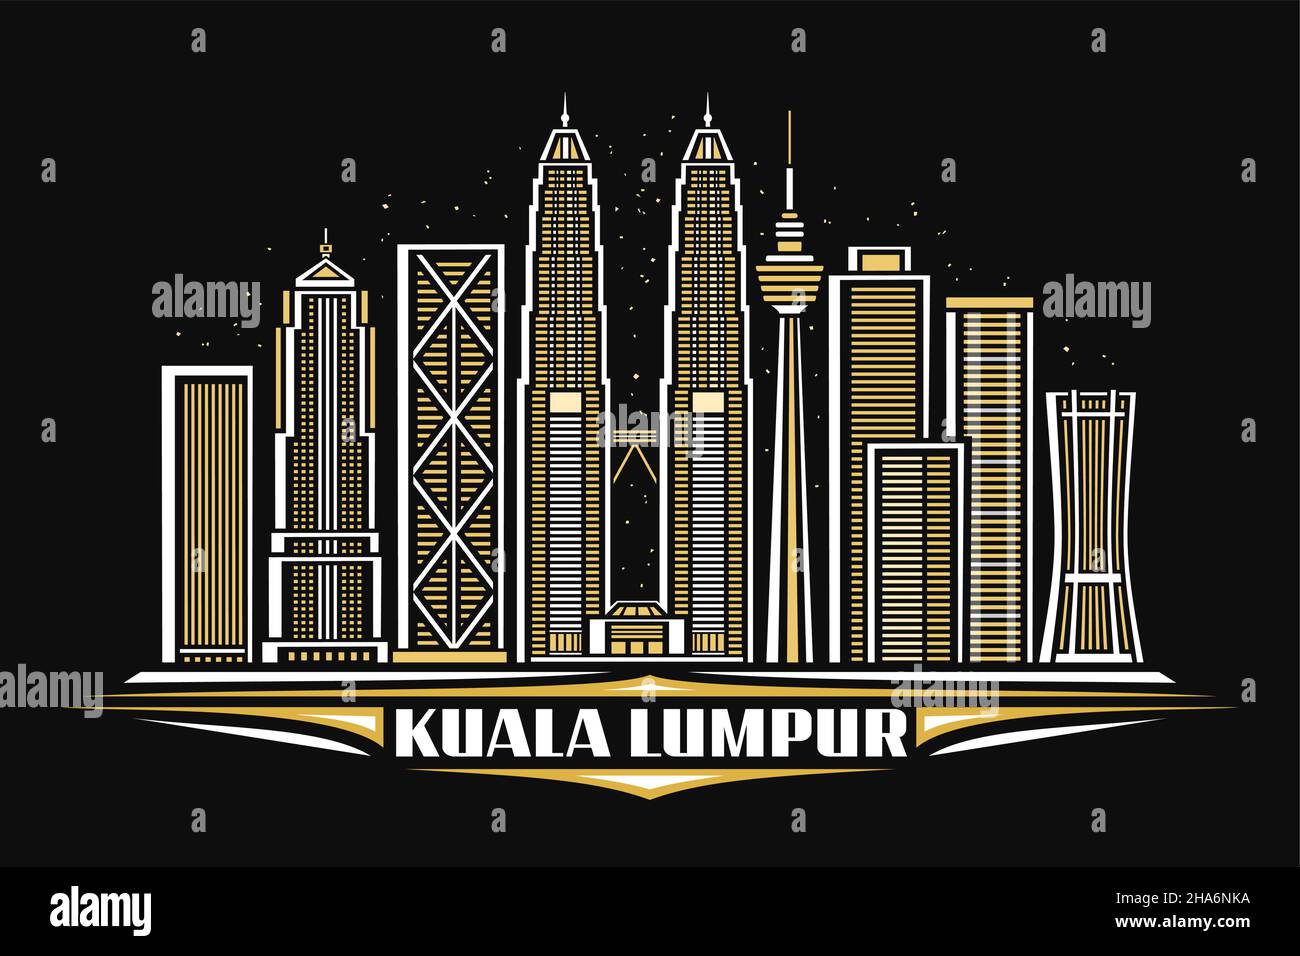 Vector illustration of Kuala Lumpur, dark horizontal poster with linear design famous city scape on dusk sky background, asian urban line art concept Stock Vector